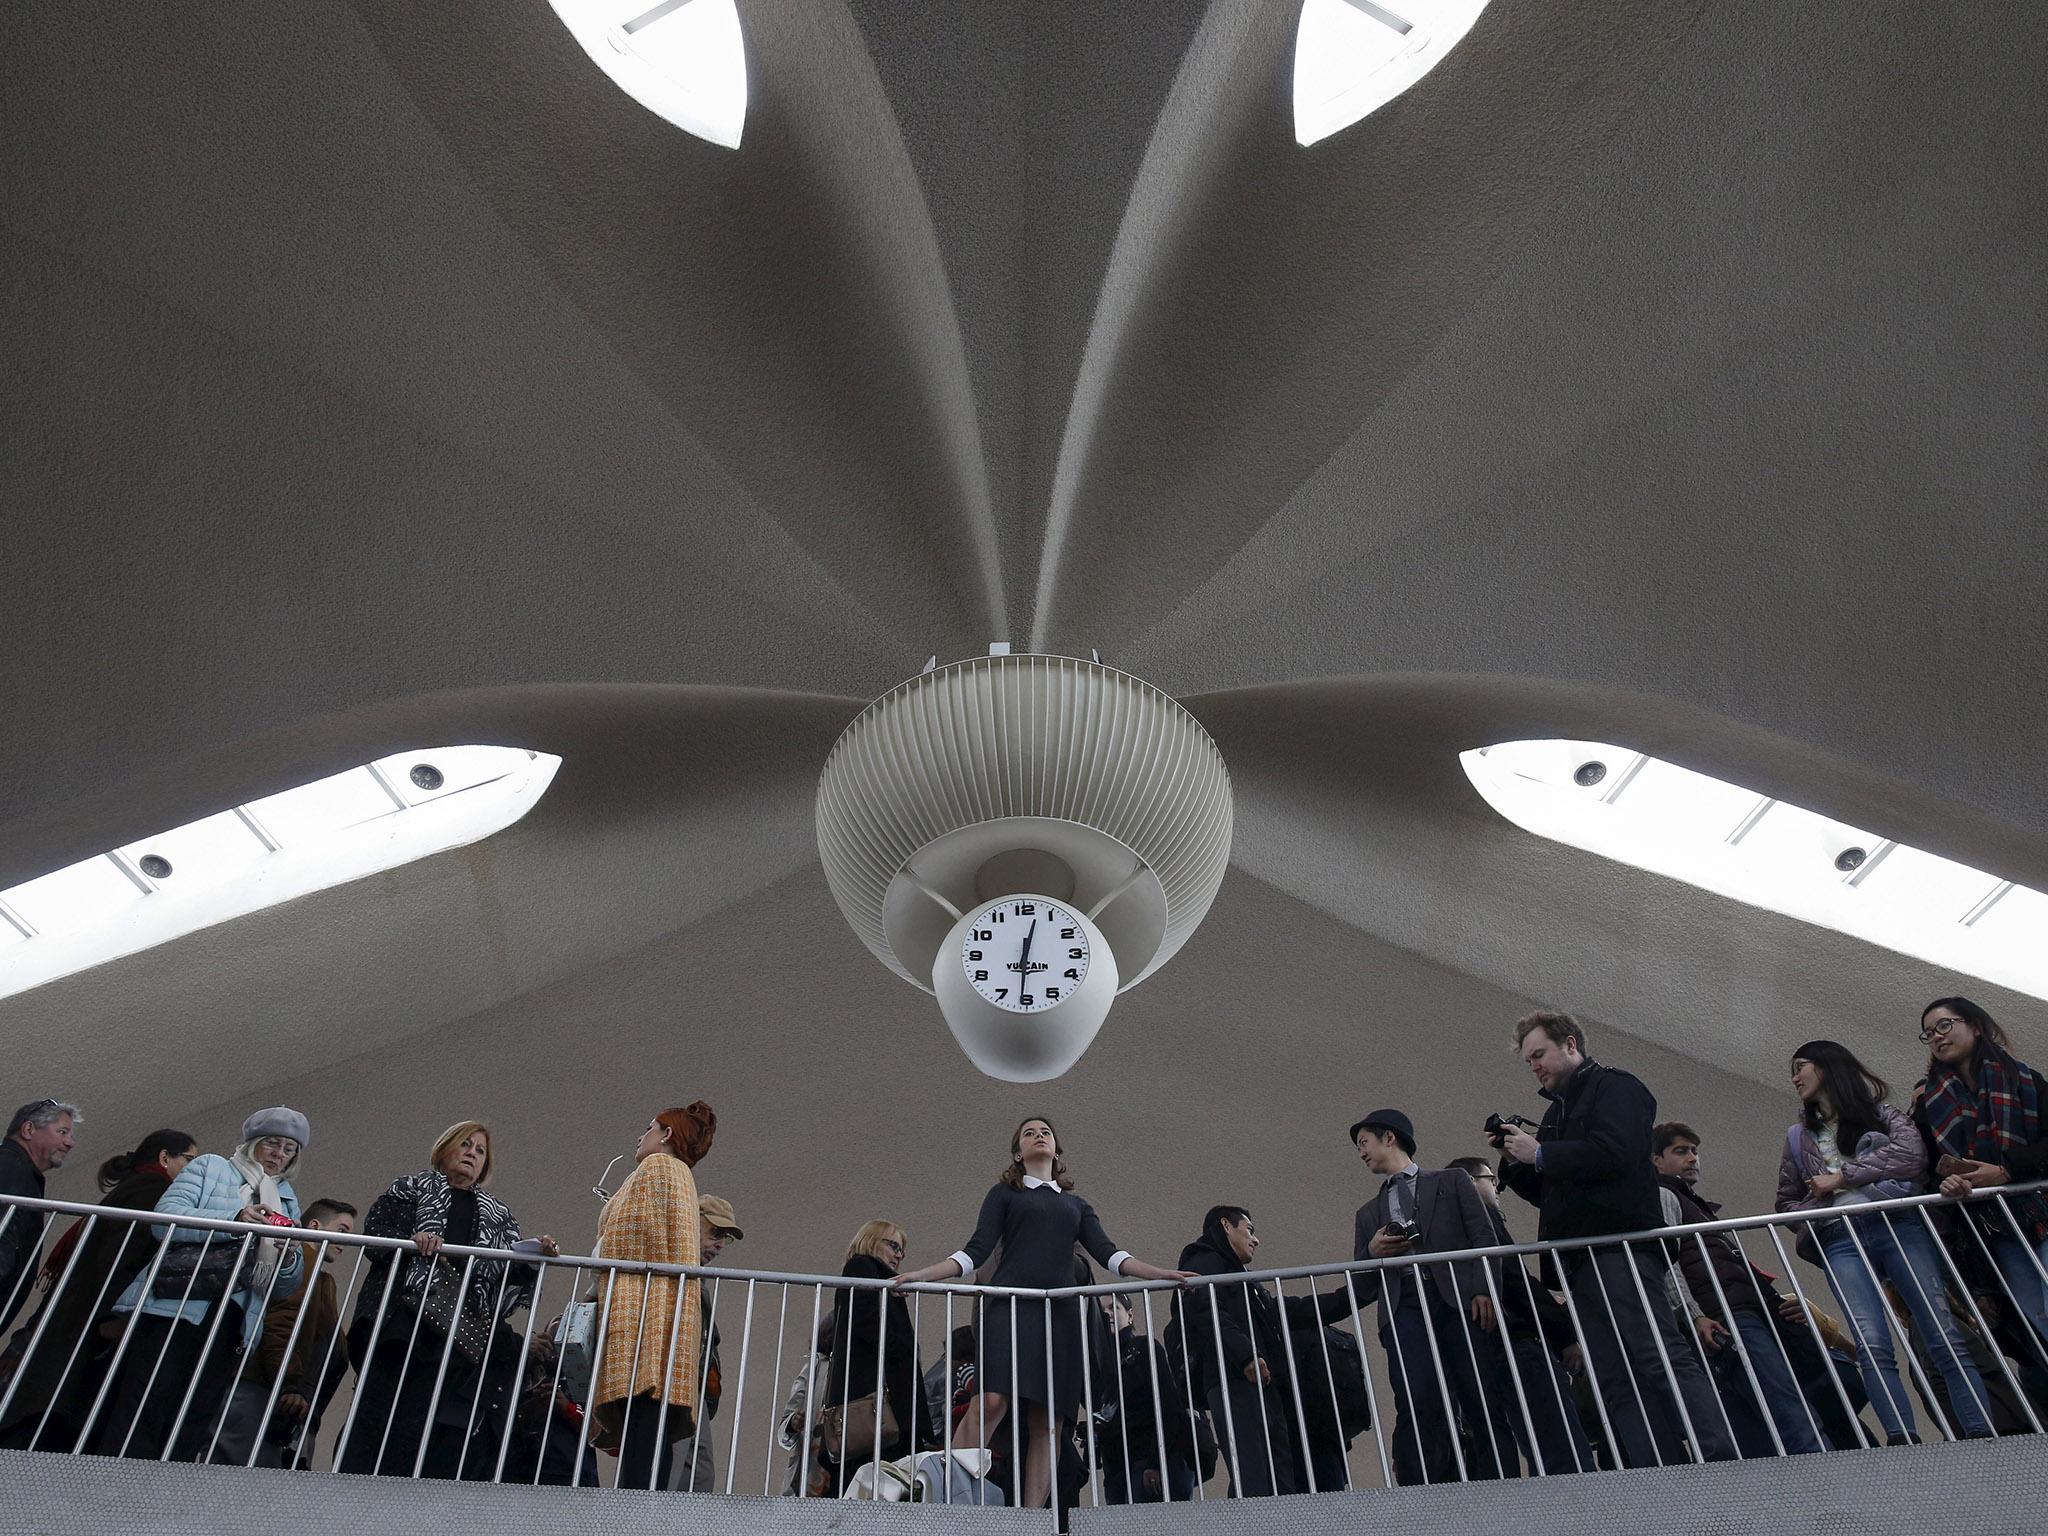 Visitors to JFK get a last look at the iconic architecture of the Trans World Airlines flight centre before the futuristic 1960s building is converted into a hotel